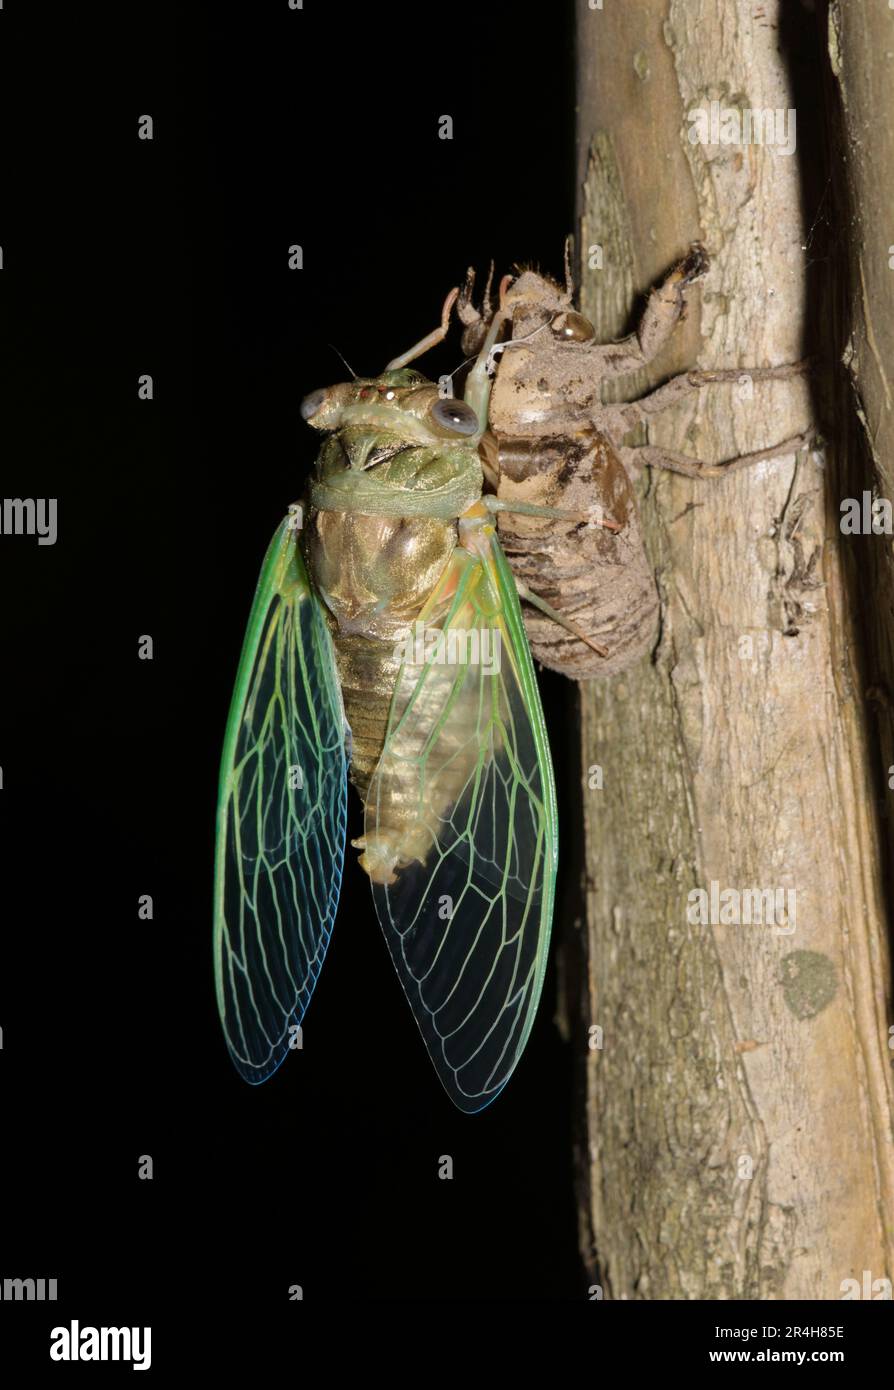 Cicada emerging from an exuvia shell on a Crepe Myrtle tree in Houston, TX at night. Common noisy insect found worldwide in the warmer months. Stock Photo